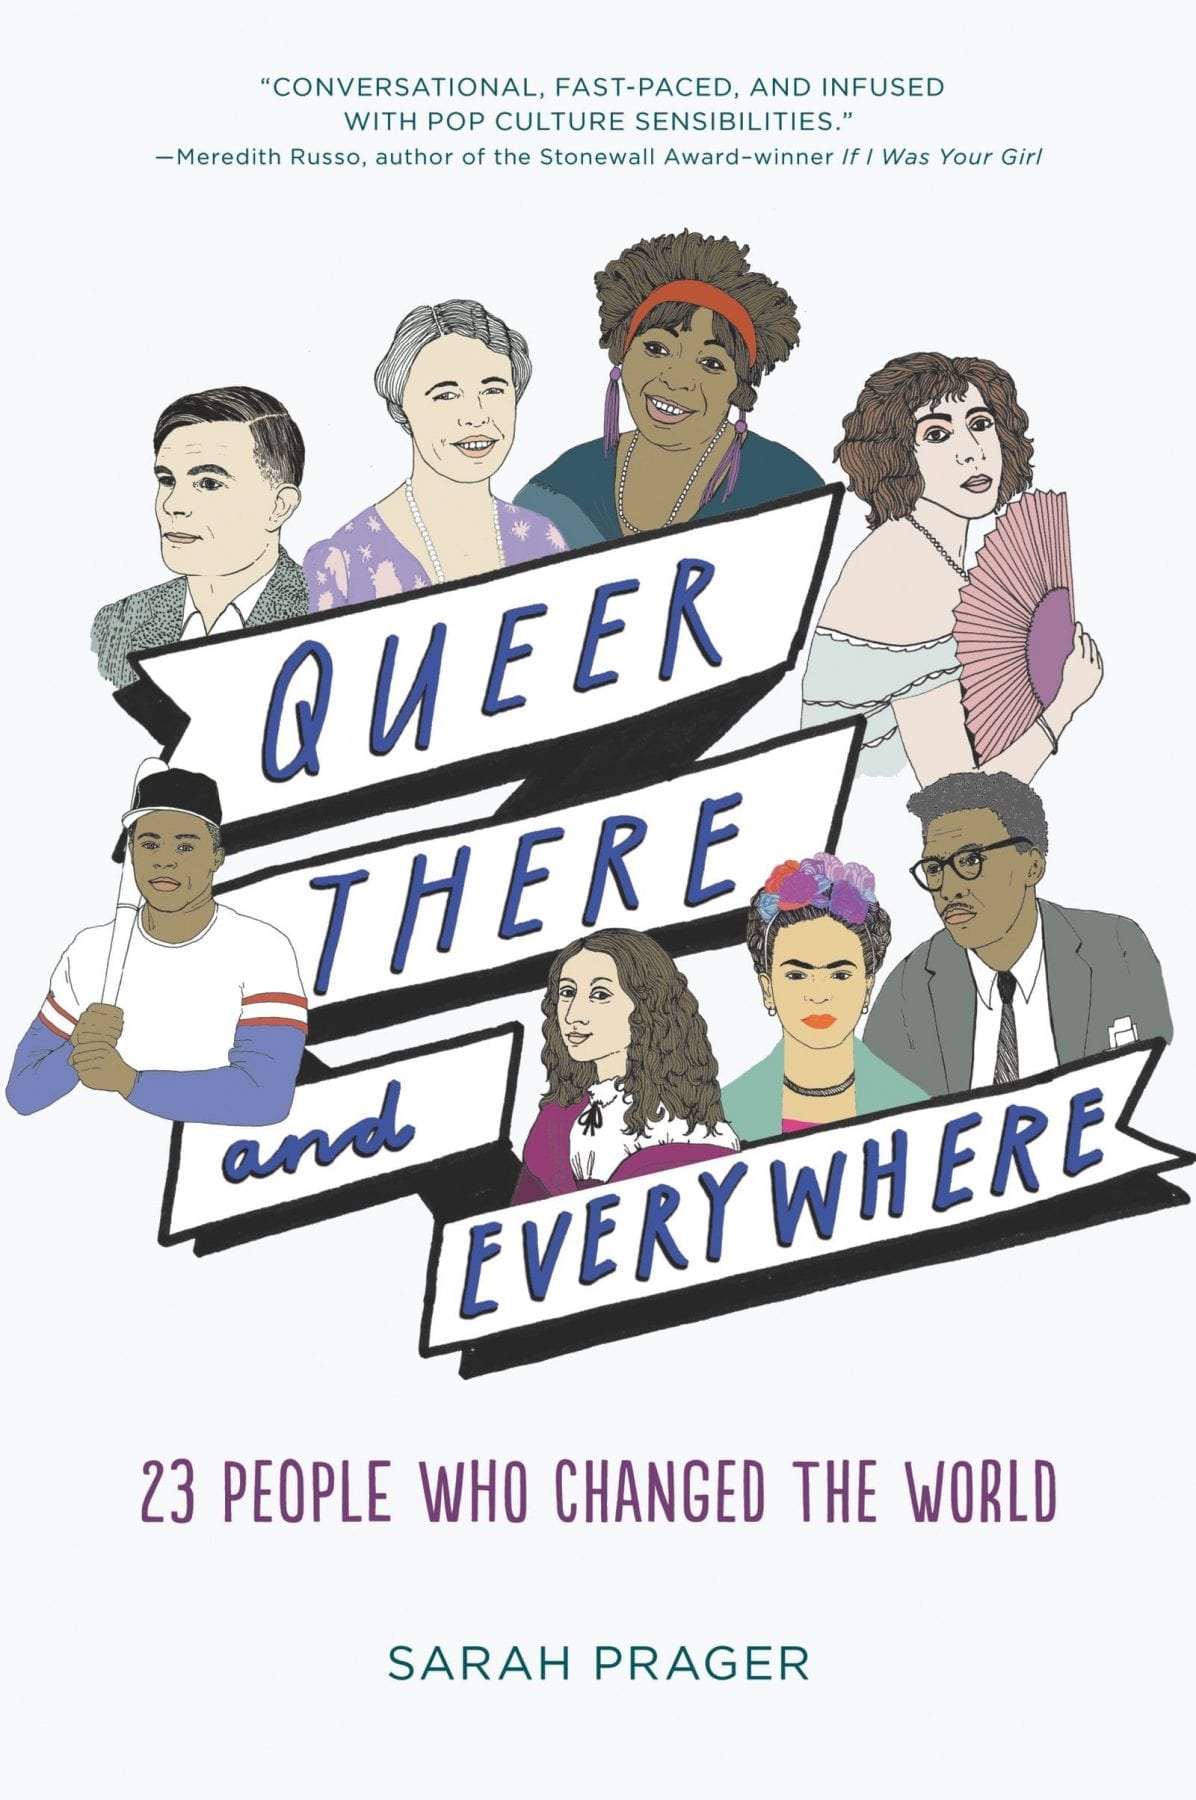 https://www.amazon.com/Queer-There-Everywhere-People-Changed/dp/0062474324/ref=tmm_pap_swatch_0?_encoding=UTF8&qid=1527884533&sr=1-1